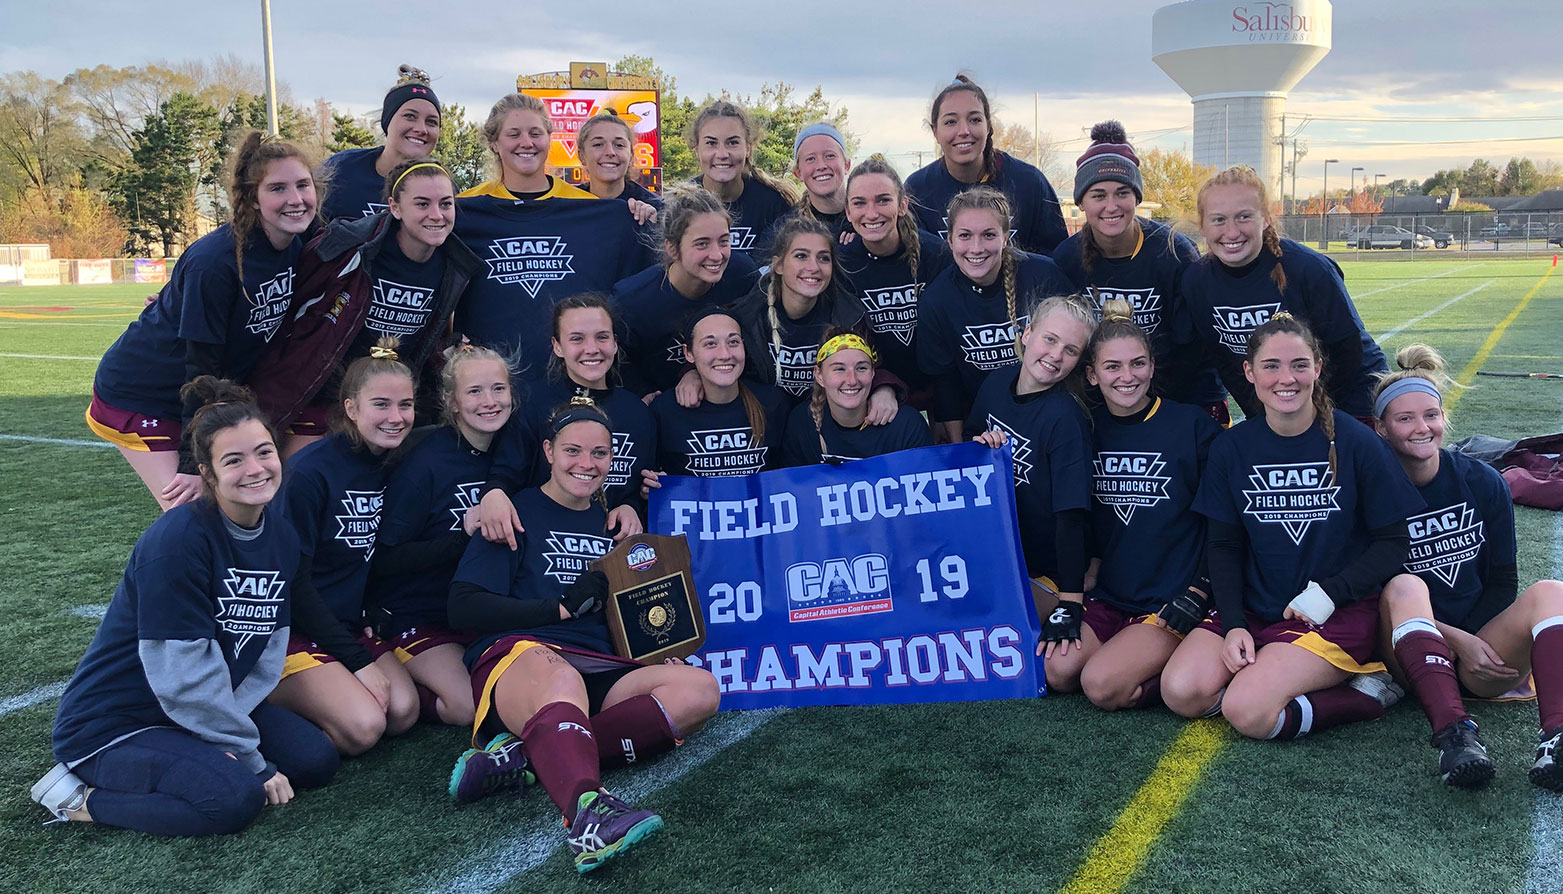 Salisbury Captures 2019 CAC Field Hockey Championship in Dramatic 2-1 Victory over CNU